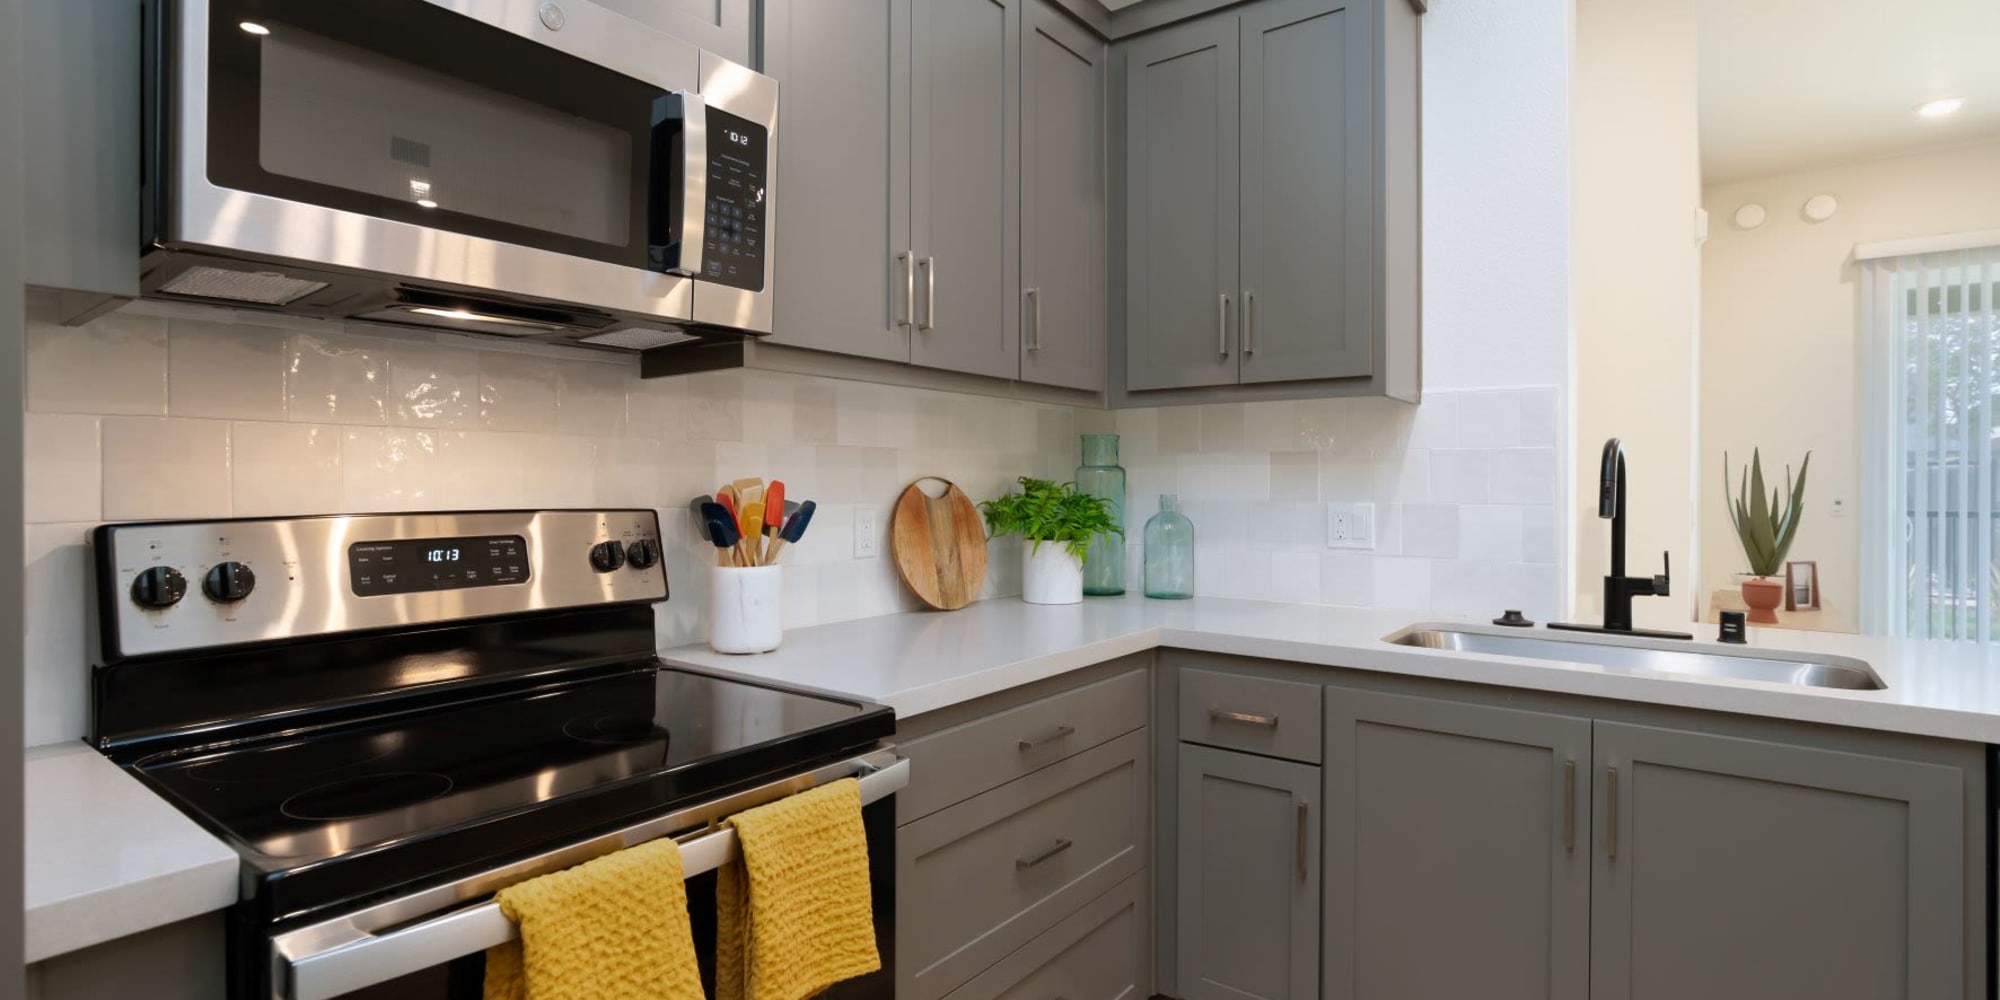 Kitchen with stainless-steel appliances at Towne Centre Apartments in Lathrop, California